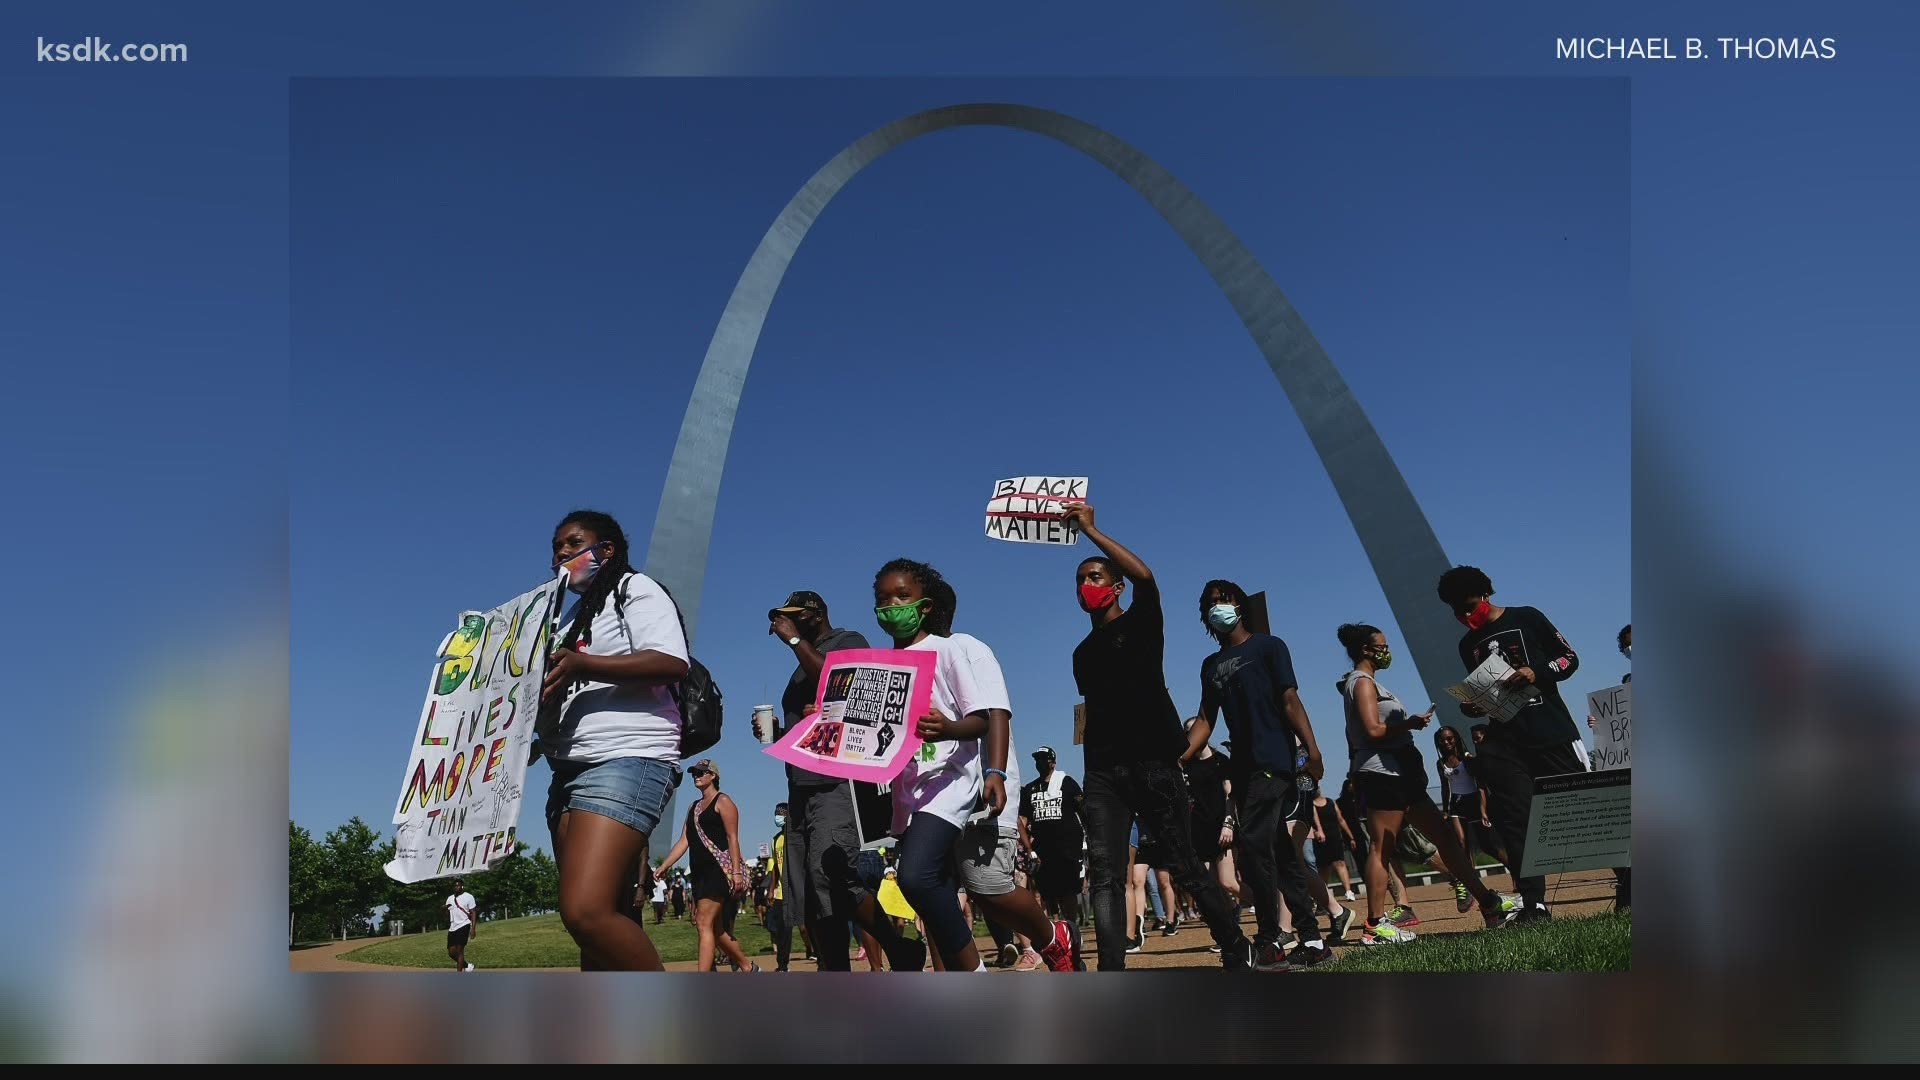 Photographer records gripping current moments in St. Louis | nrd.kbic-nsn.gov